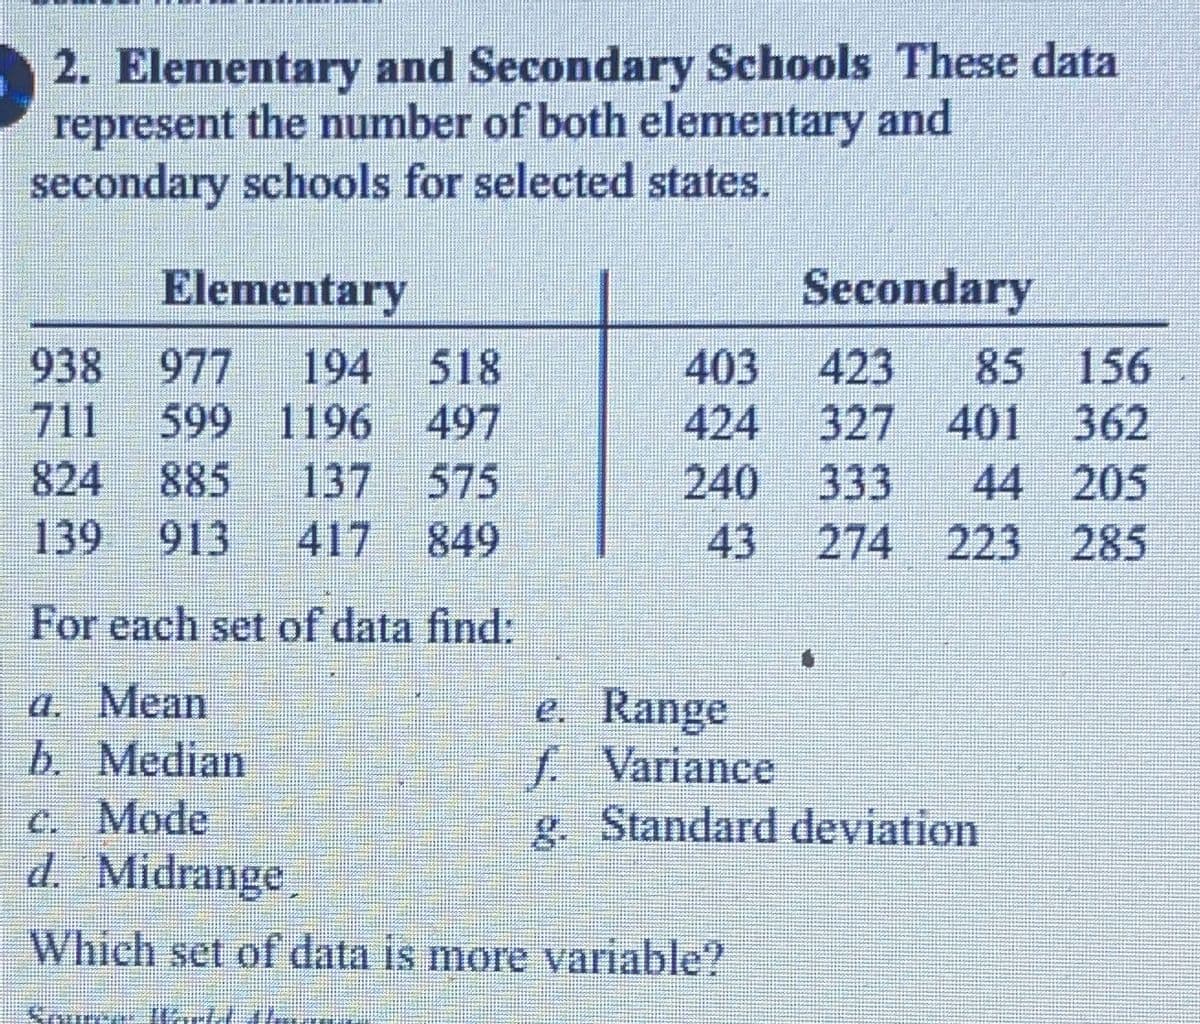 2. Elementary and Secondary Schools These data
represent the number of both elementary and
secondary schools for selected states.
Elementary
938 977 194
518
711 599 1196
497
824
885 137 575
139 913 417 849
For each set of data find:
a. Mean
b. Median
Secondary
403
423 85
156
424 327 401 362
240 333 44 205
43 274 223 285
Kama UISLI
e. Range
f. Variance
g. Standard deviation
c. Mode
d. Midrange
Which set of data is more variable?